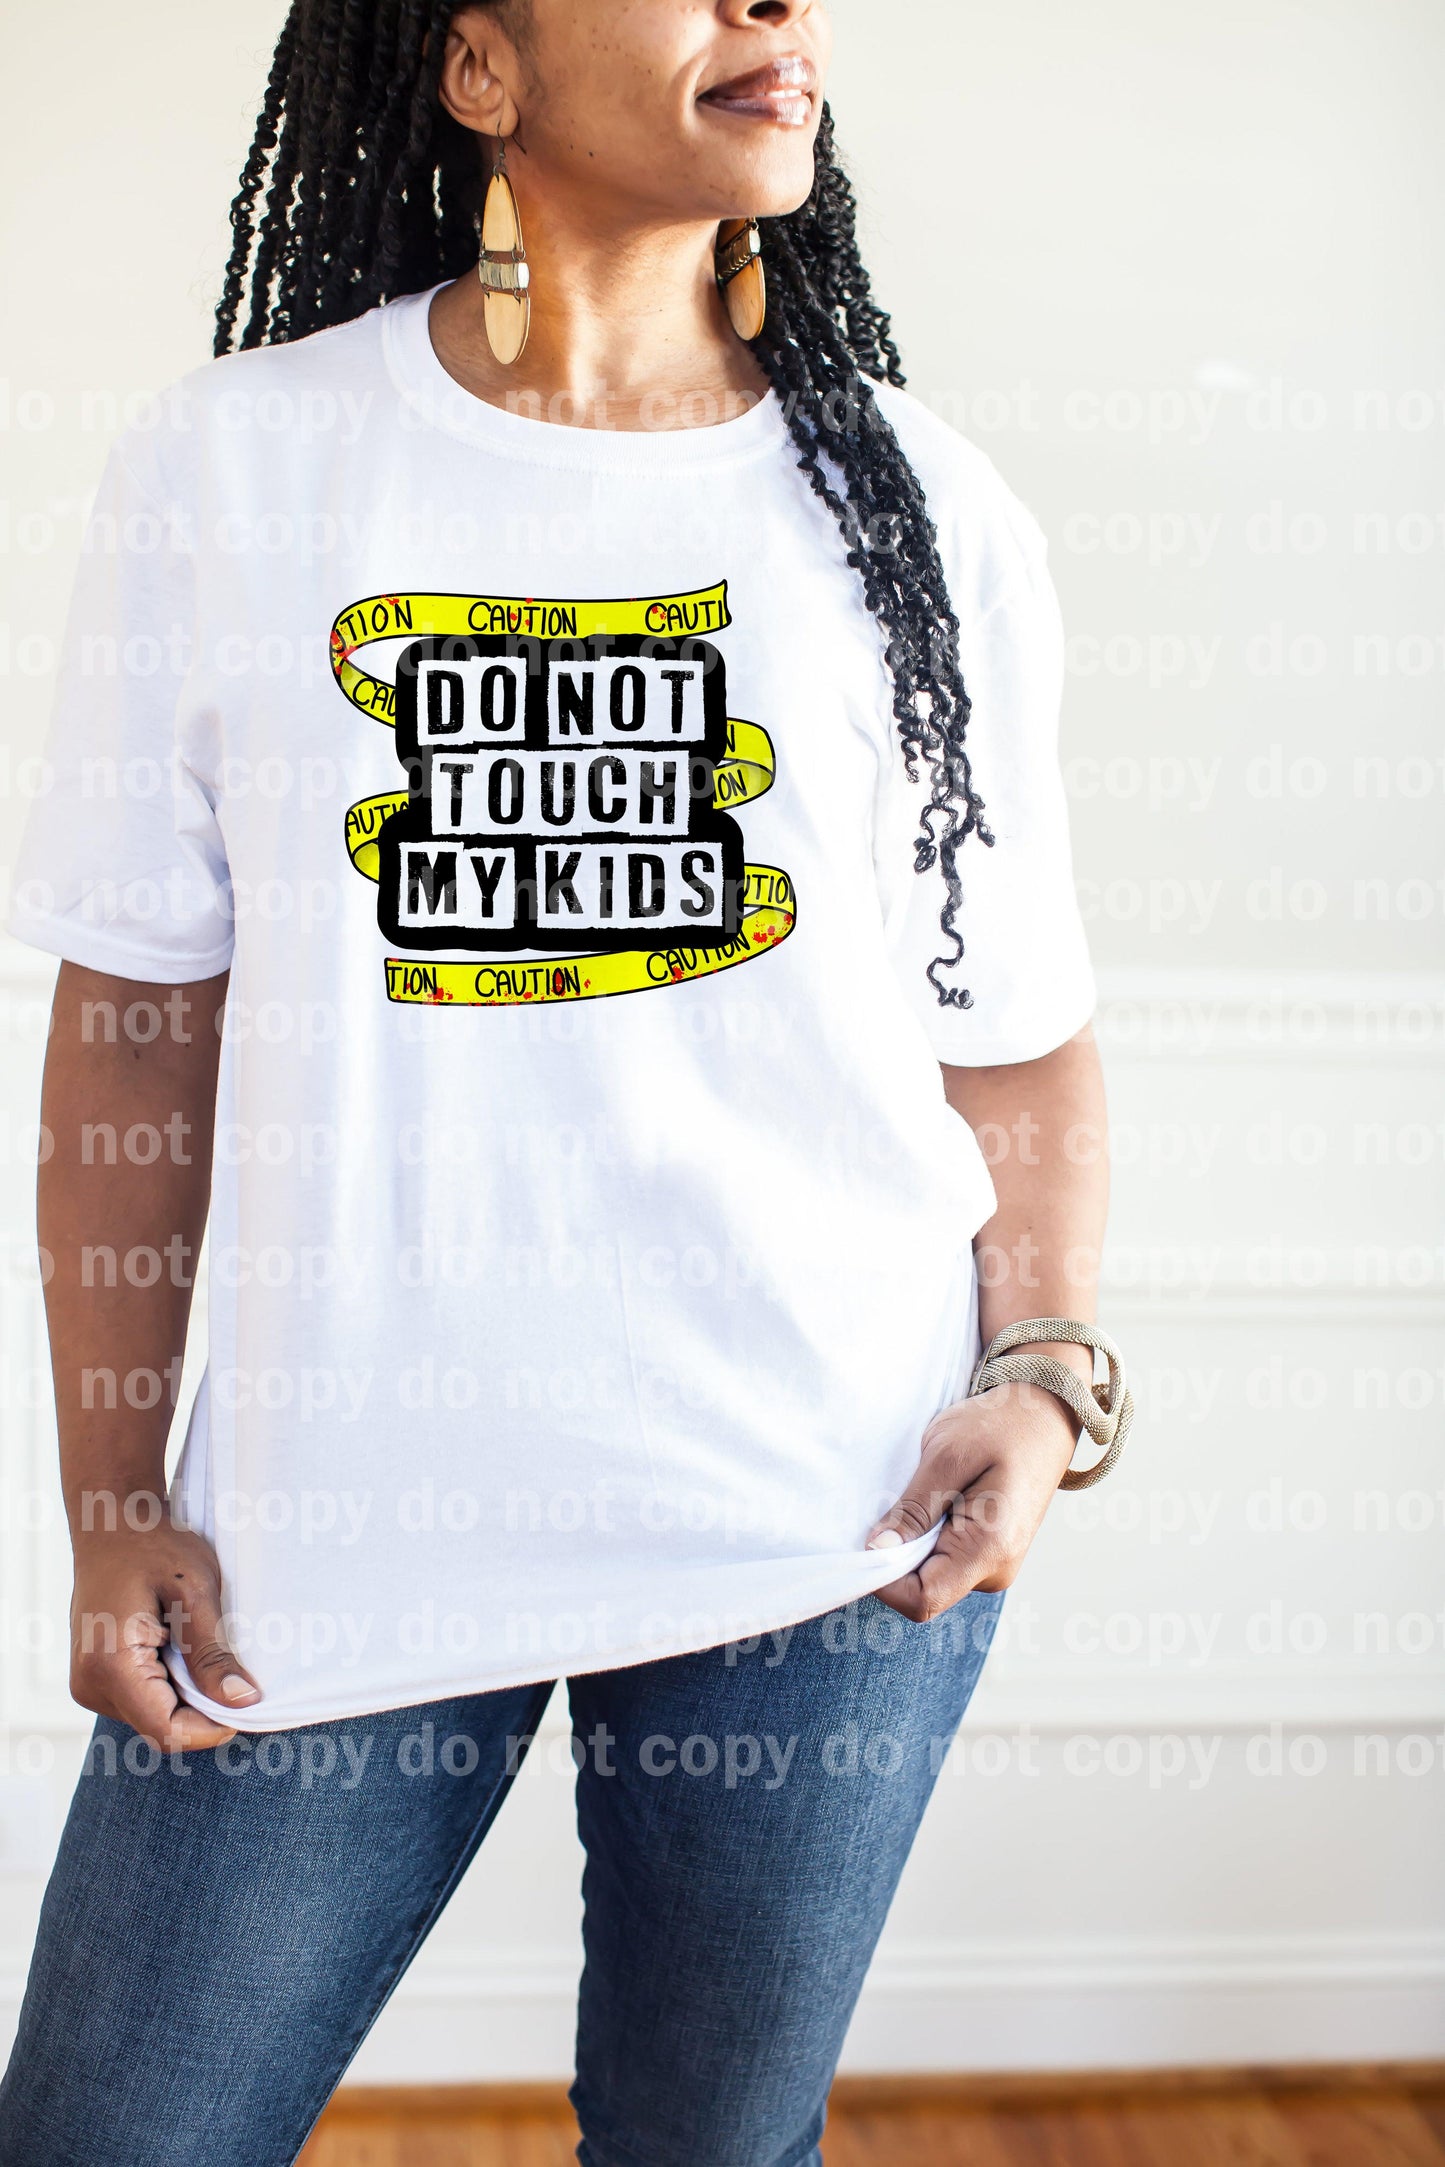 Do Not Touch My Kids Caution Tape Dream Print or Sublimation Print